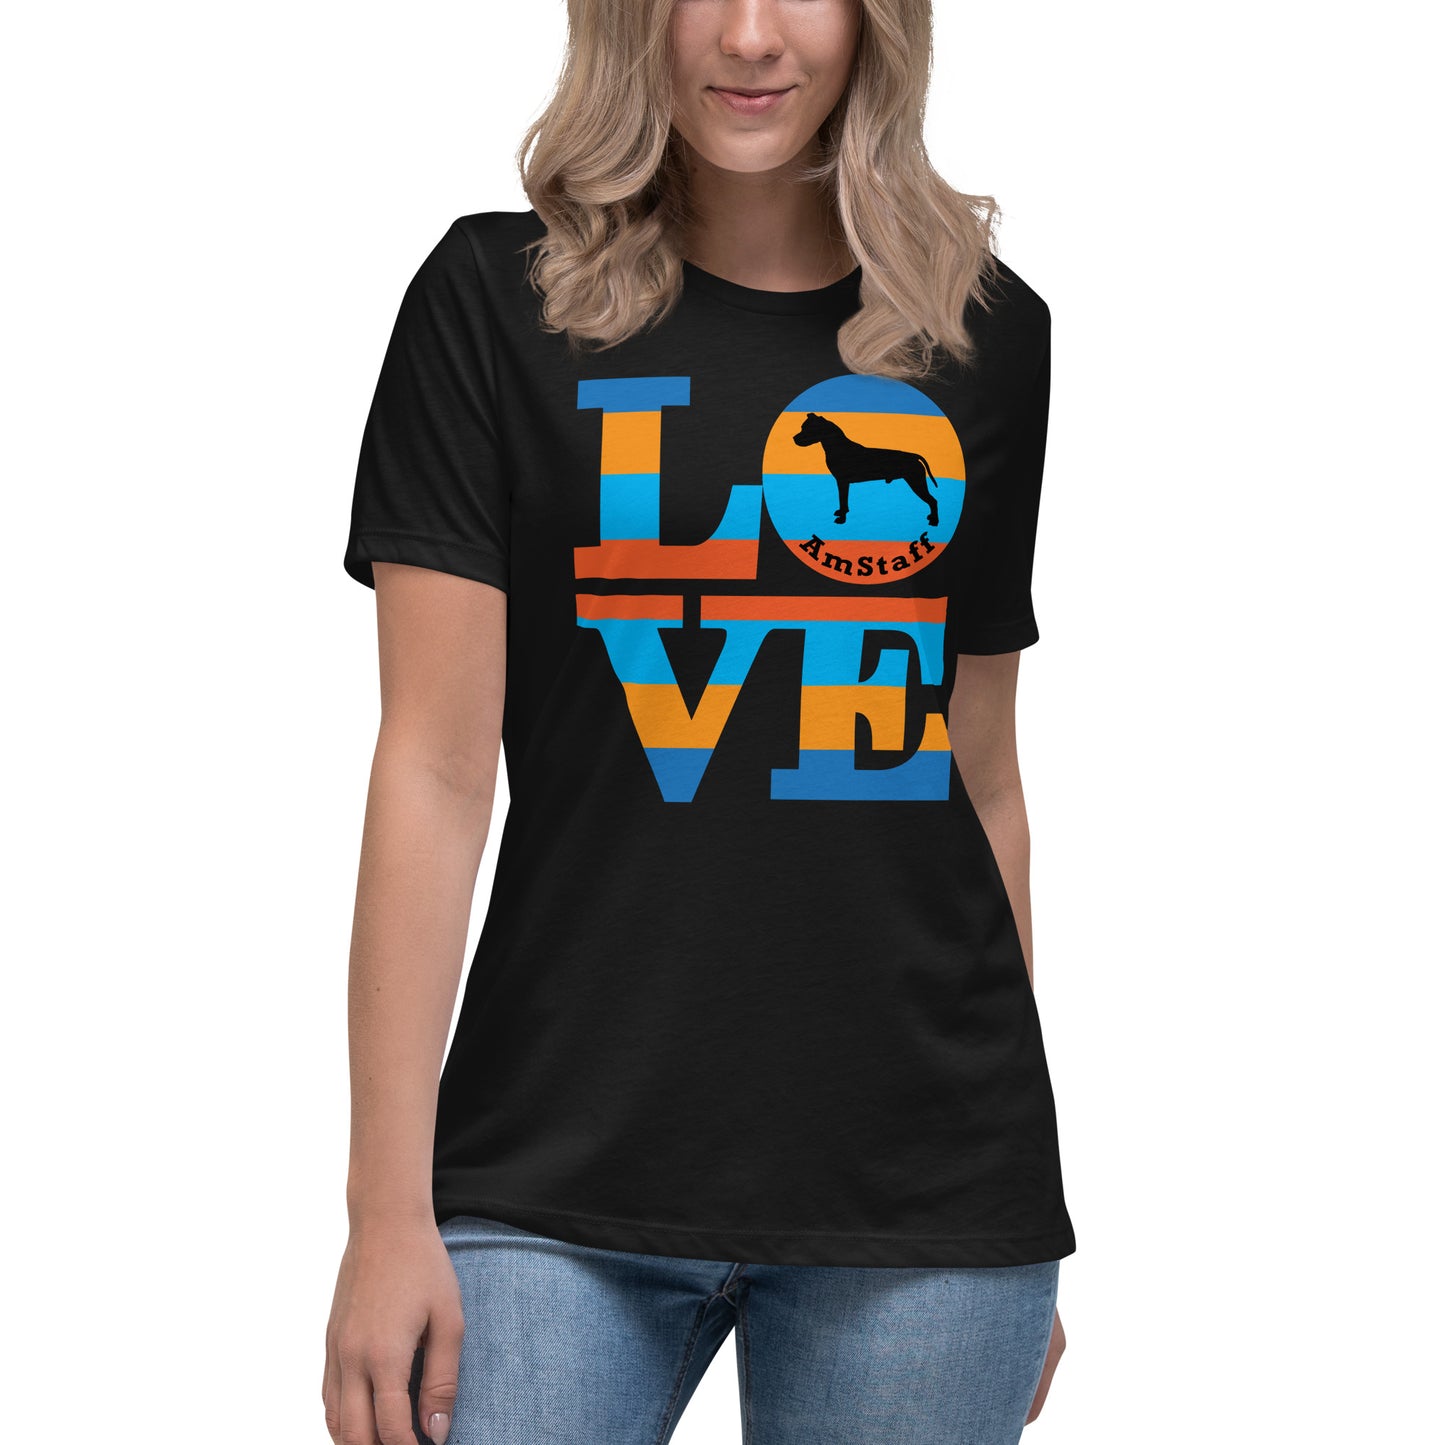 American Staffordshire Terrier Love women’s black t-shirt by Dog Artistry.